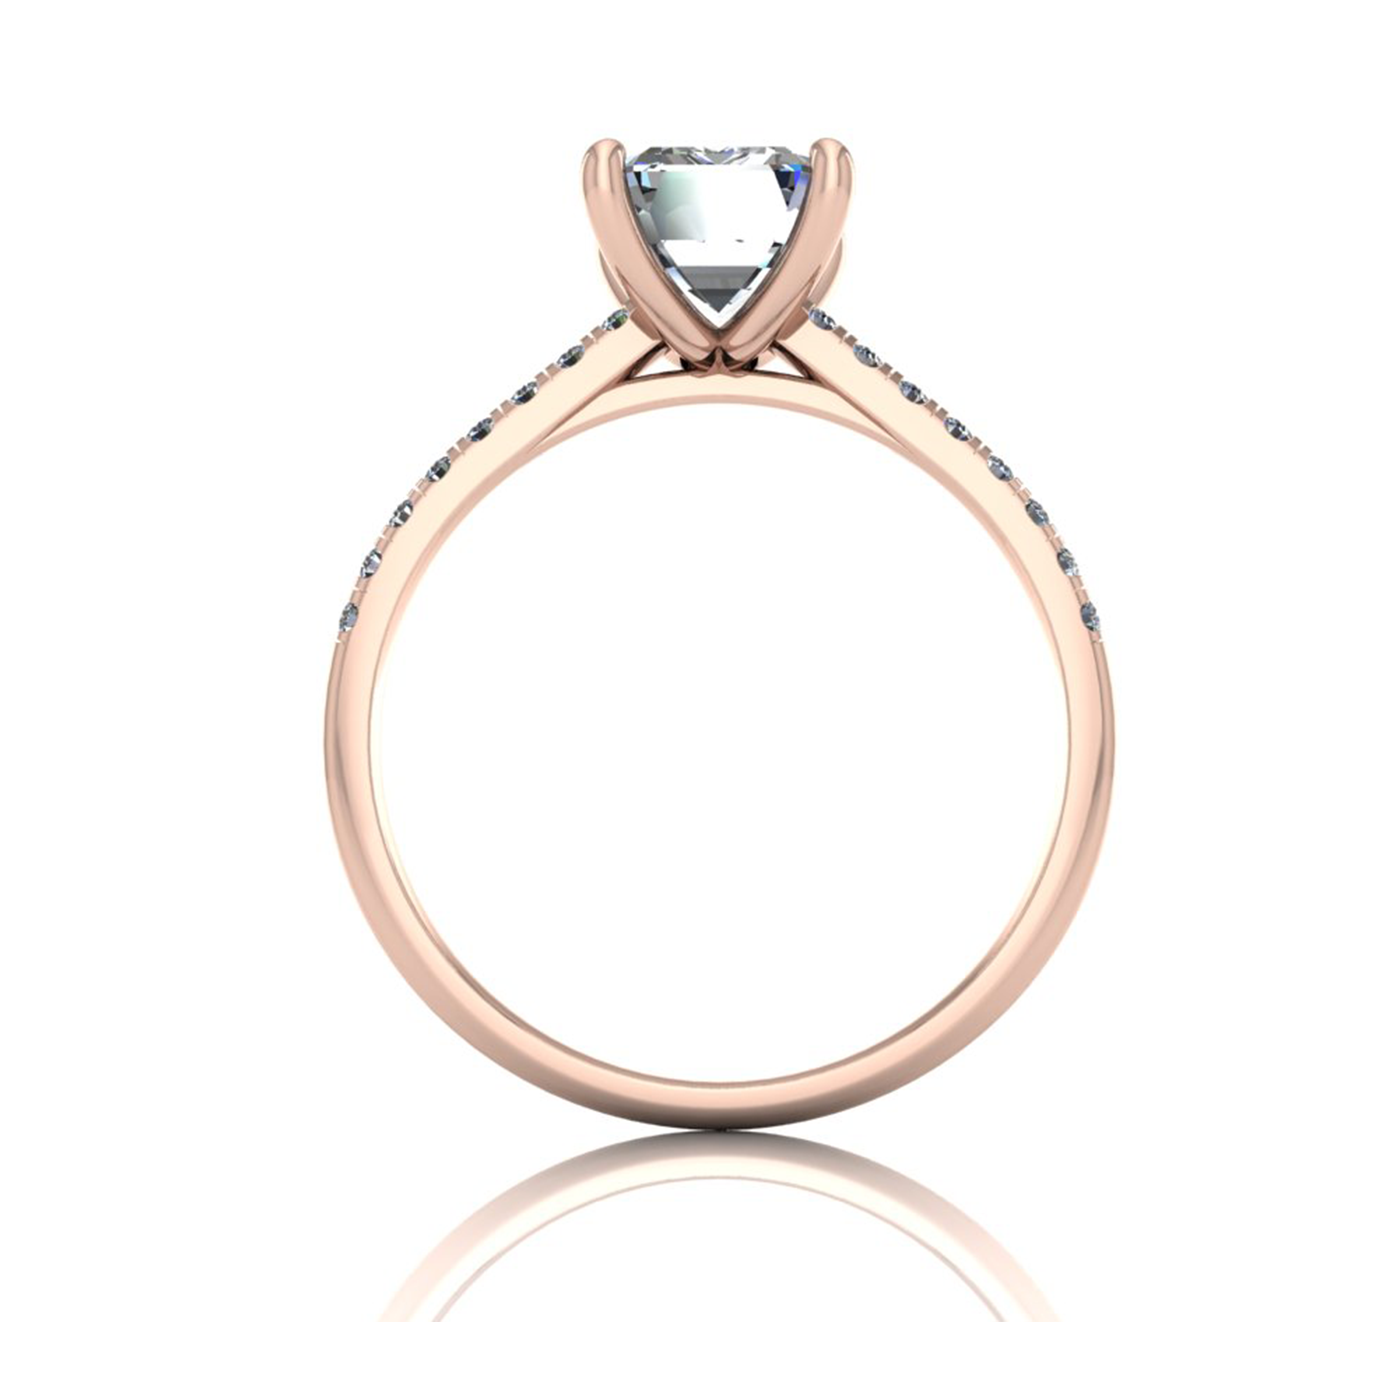 18k rose gold 1.2ct 4 prongs emerald cut diamond engagement ring with whisper thin pavÉ set band